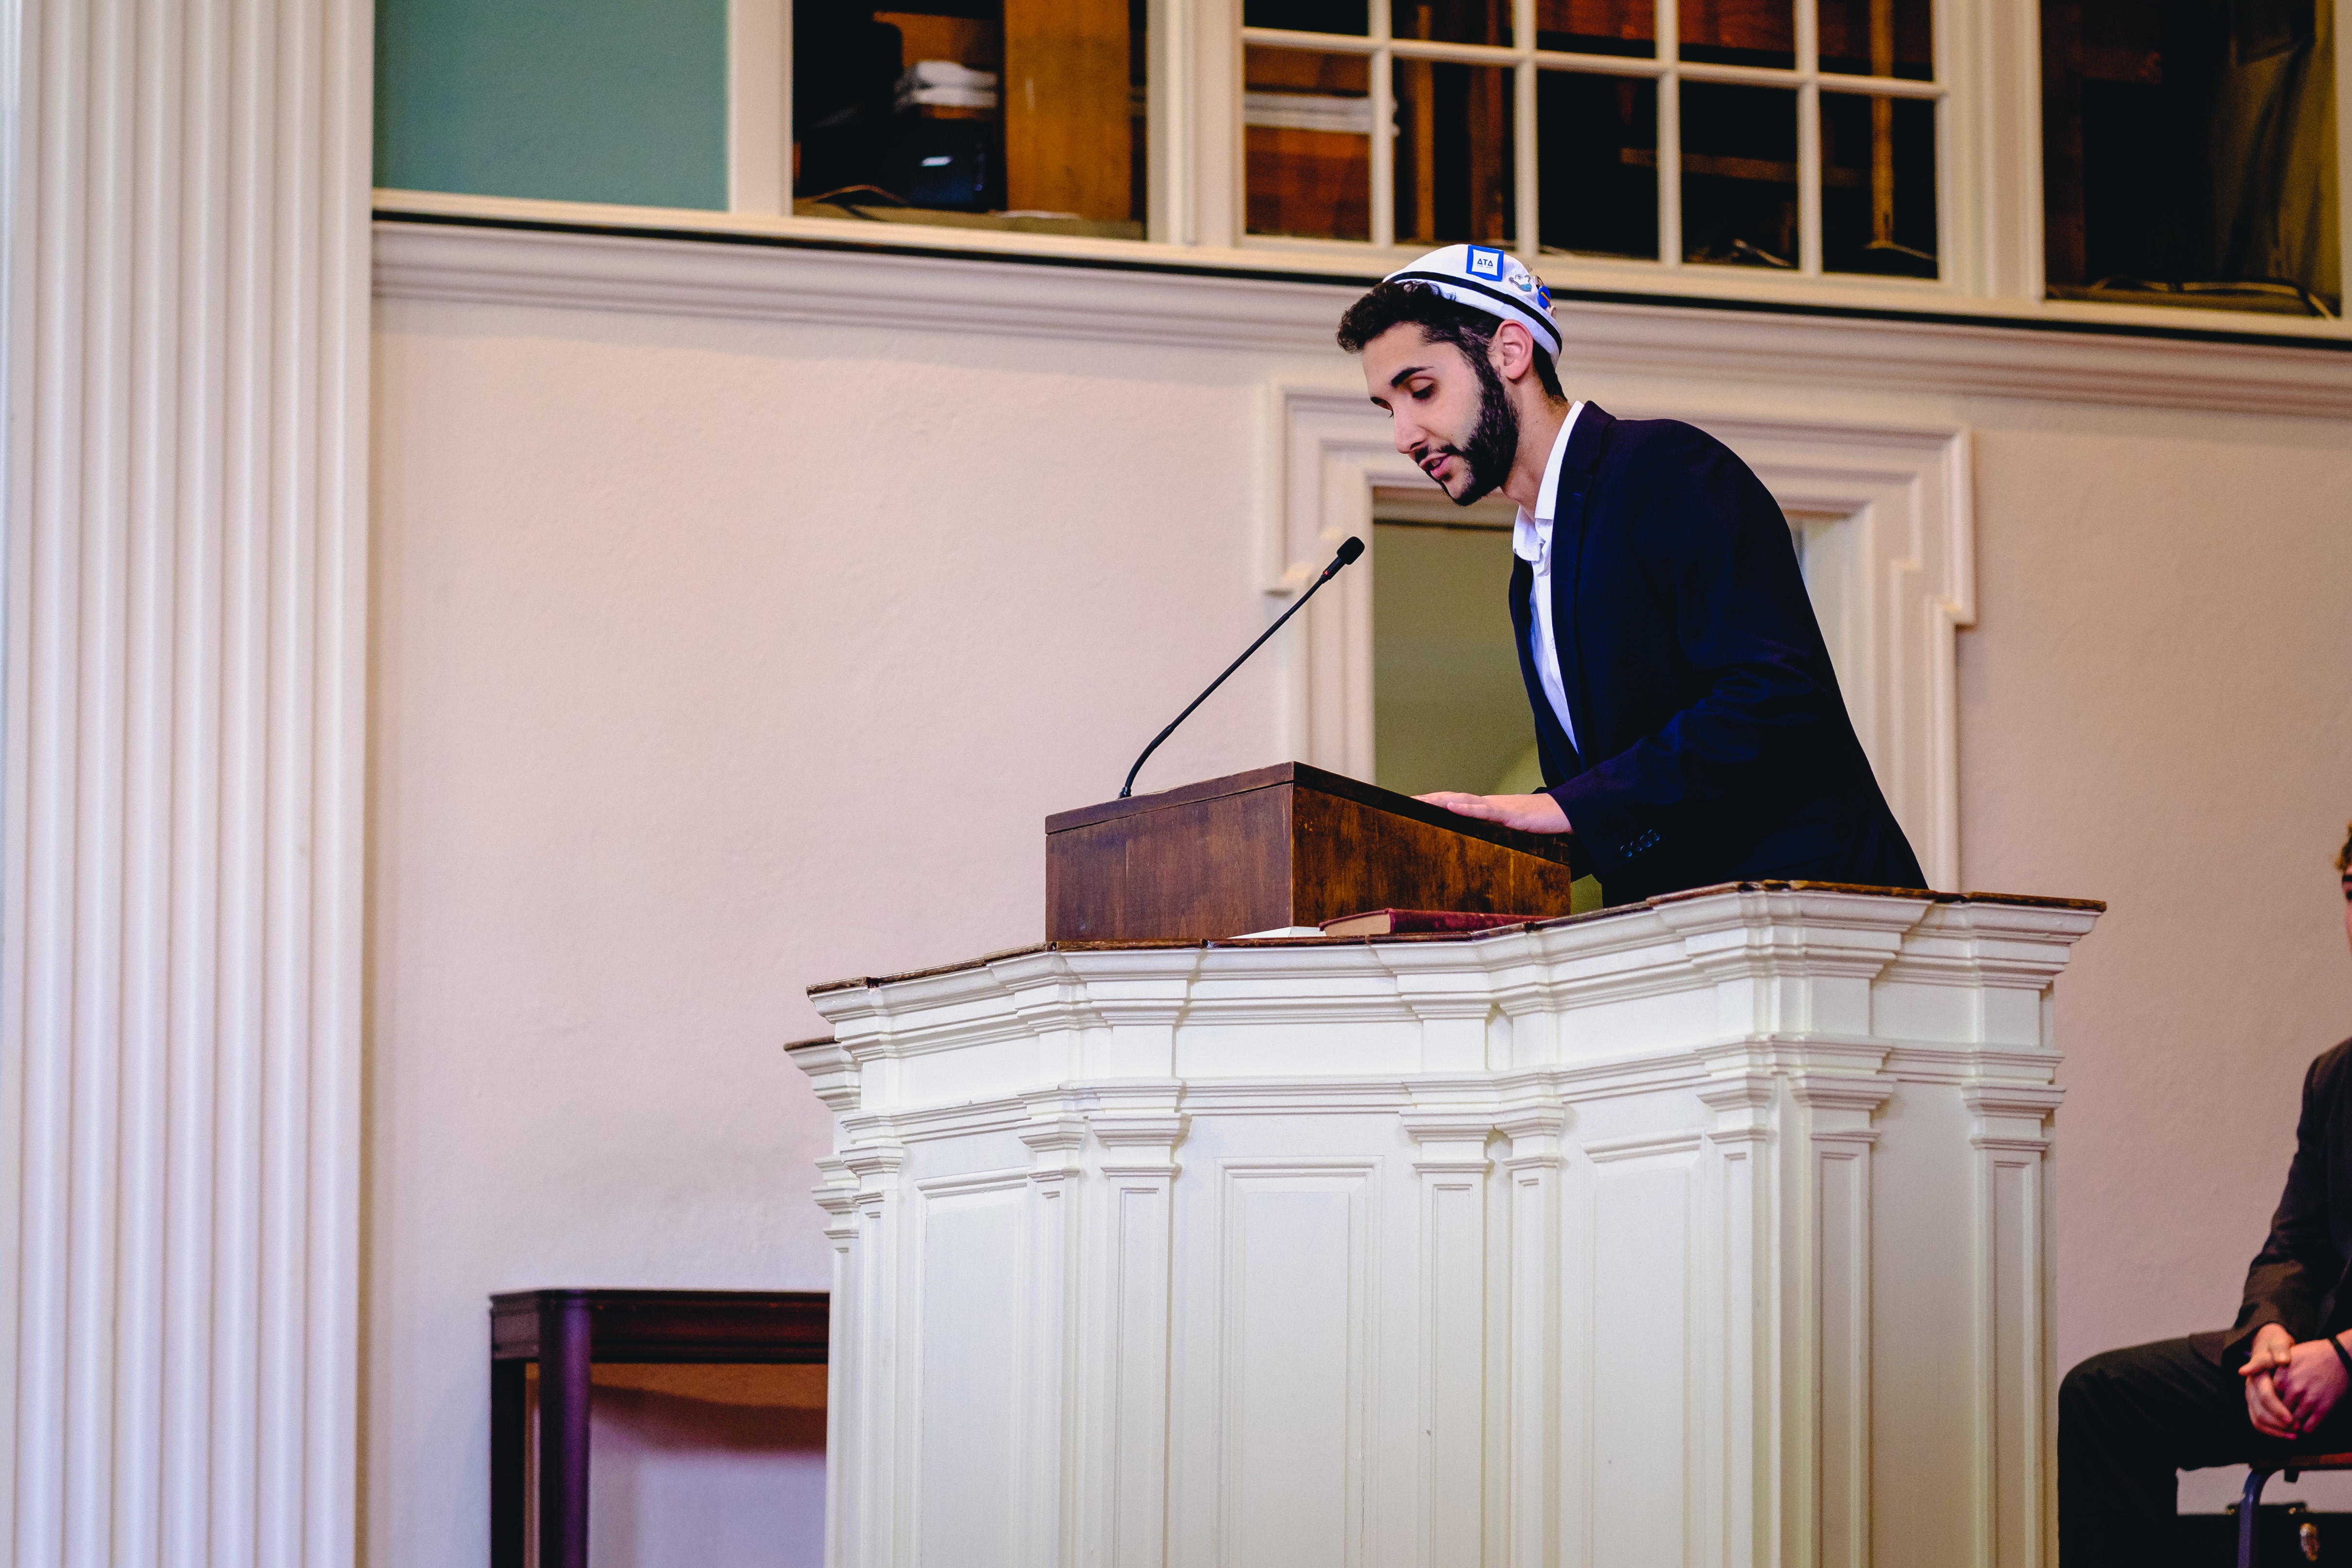 El-Khalili has distinguished himself at Wabash through a variety of academic achievement and campus leadership roles, including serving as Sphinx Club president. 